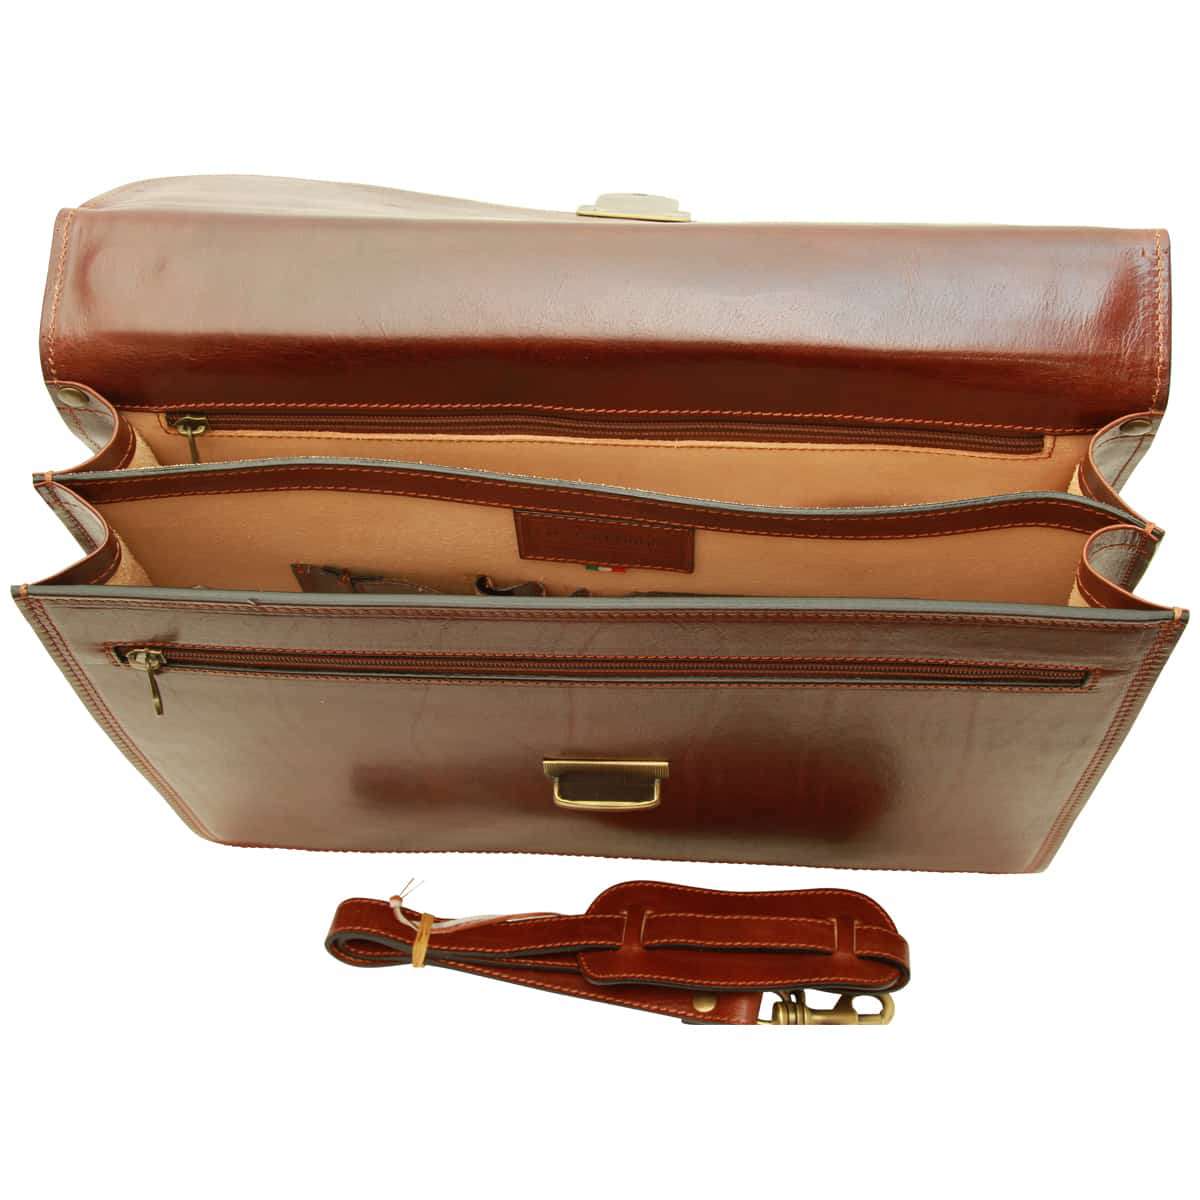 Vachetta Leather Briefcase - Brown | 200105MA UK | Old Angler Firenze